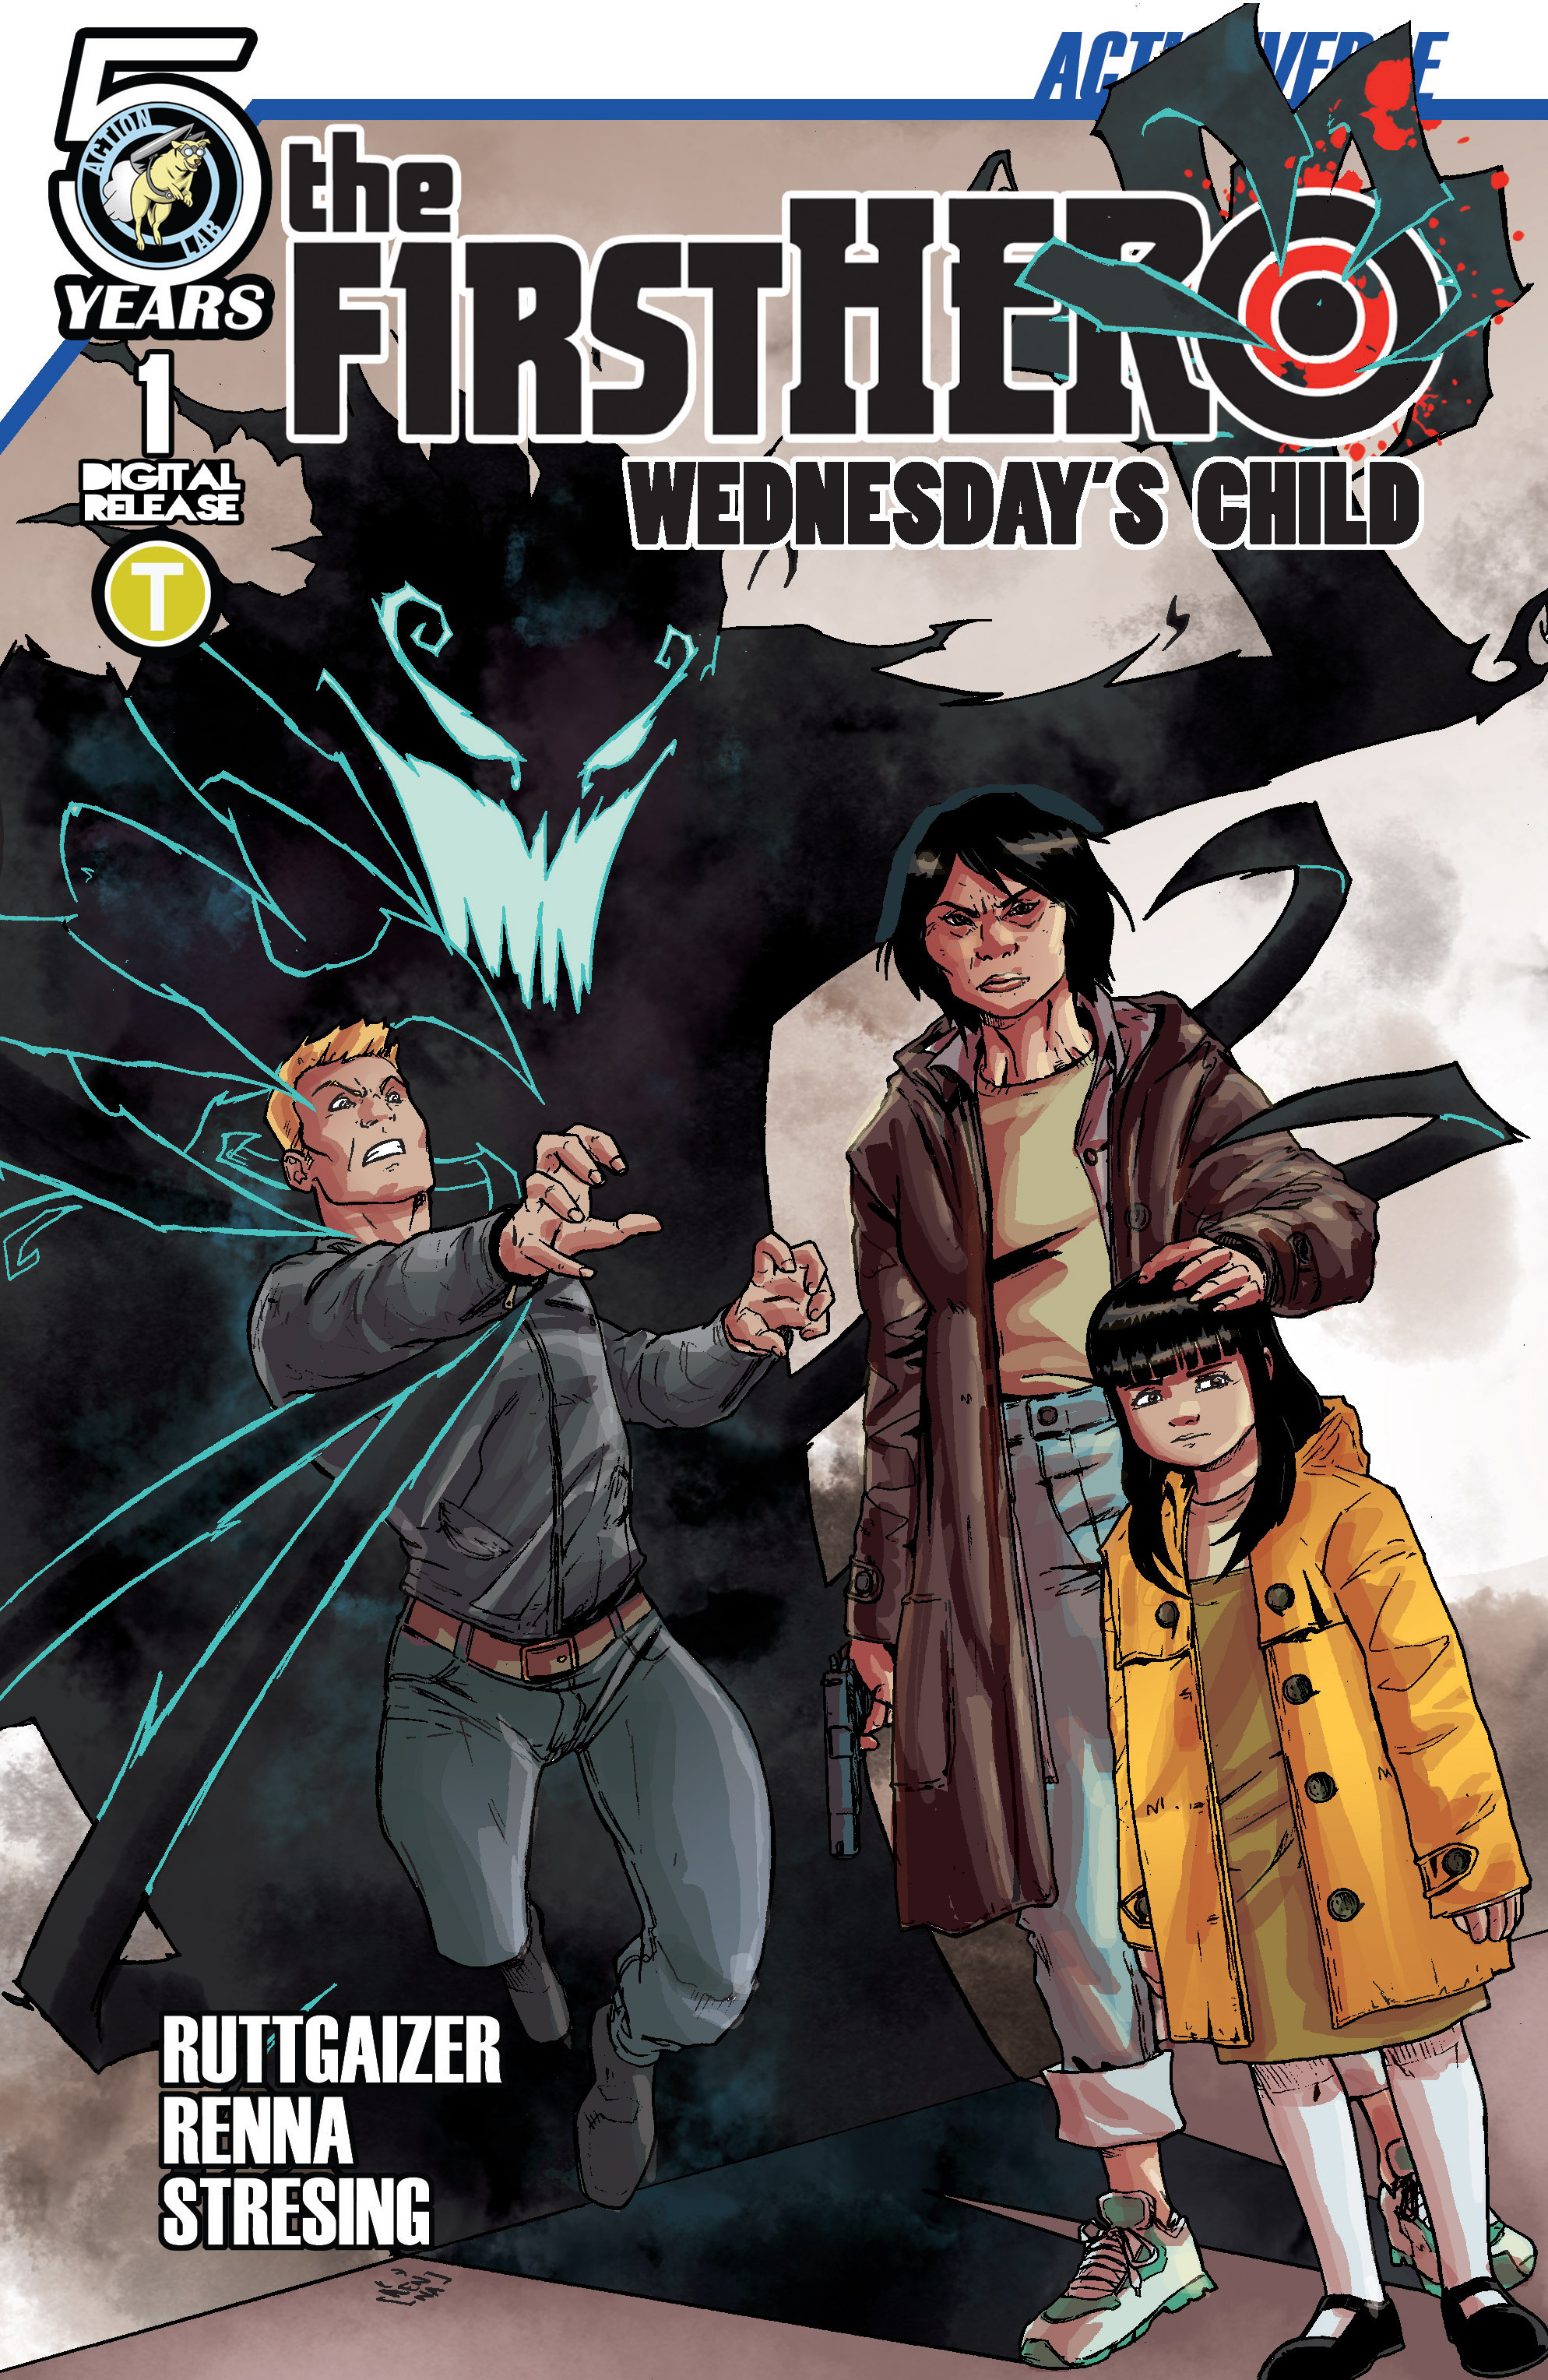 Read online The F1rst Hero: Wednesday's Child comic -  Issue #1 - 1